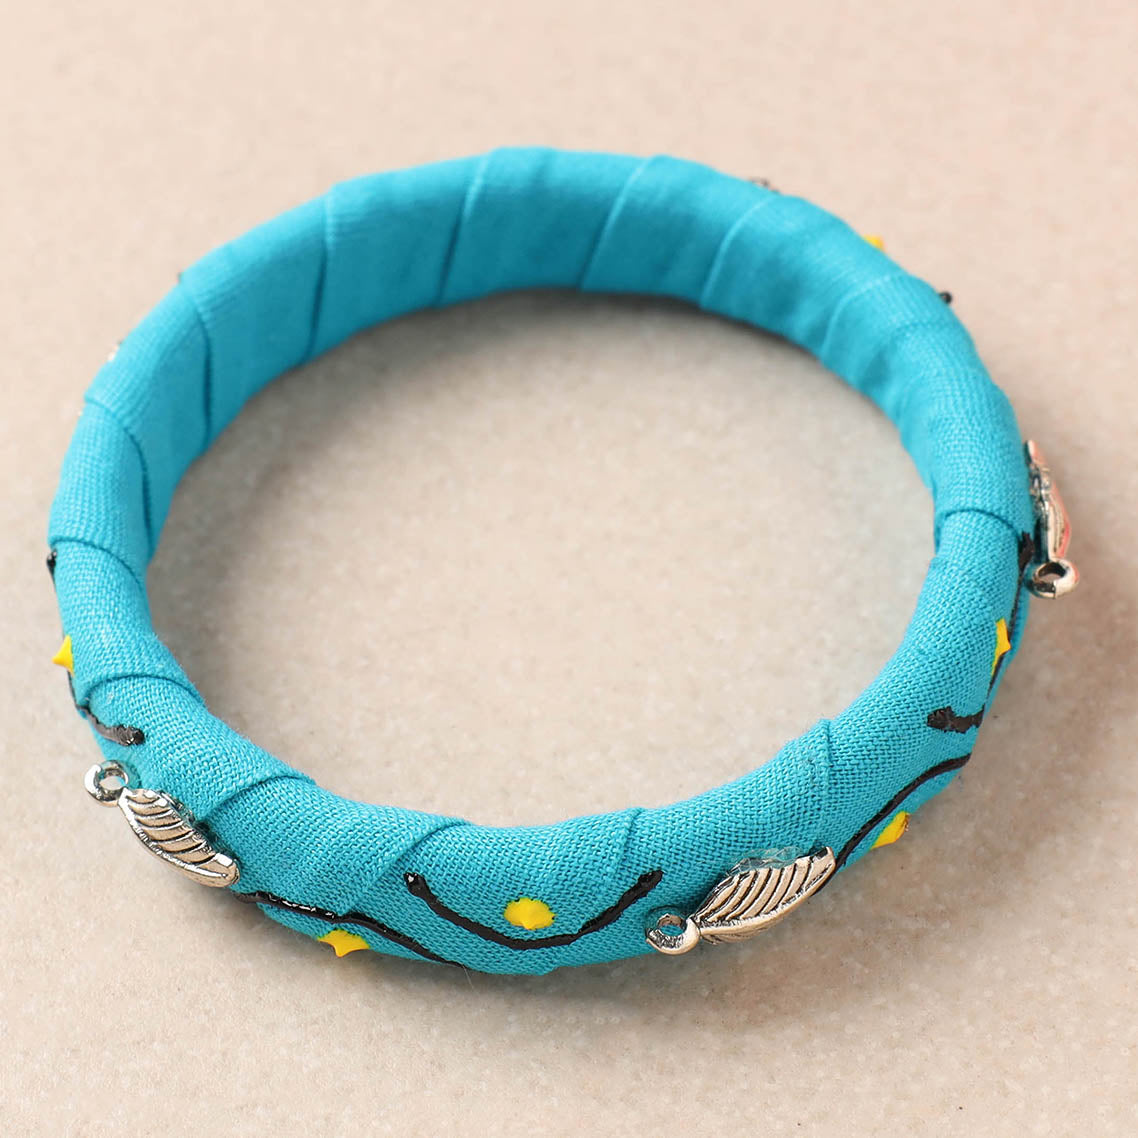 Handcrafted Fabart Bangle by Asalkaar (Size - 2-4)